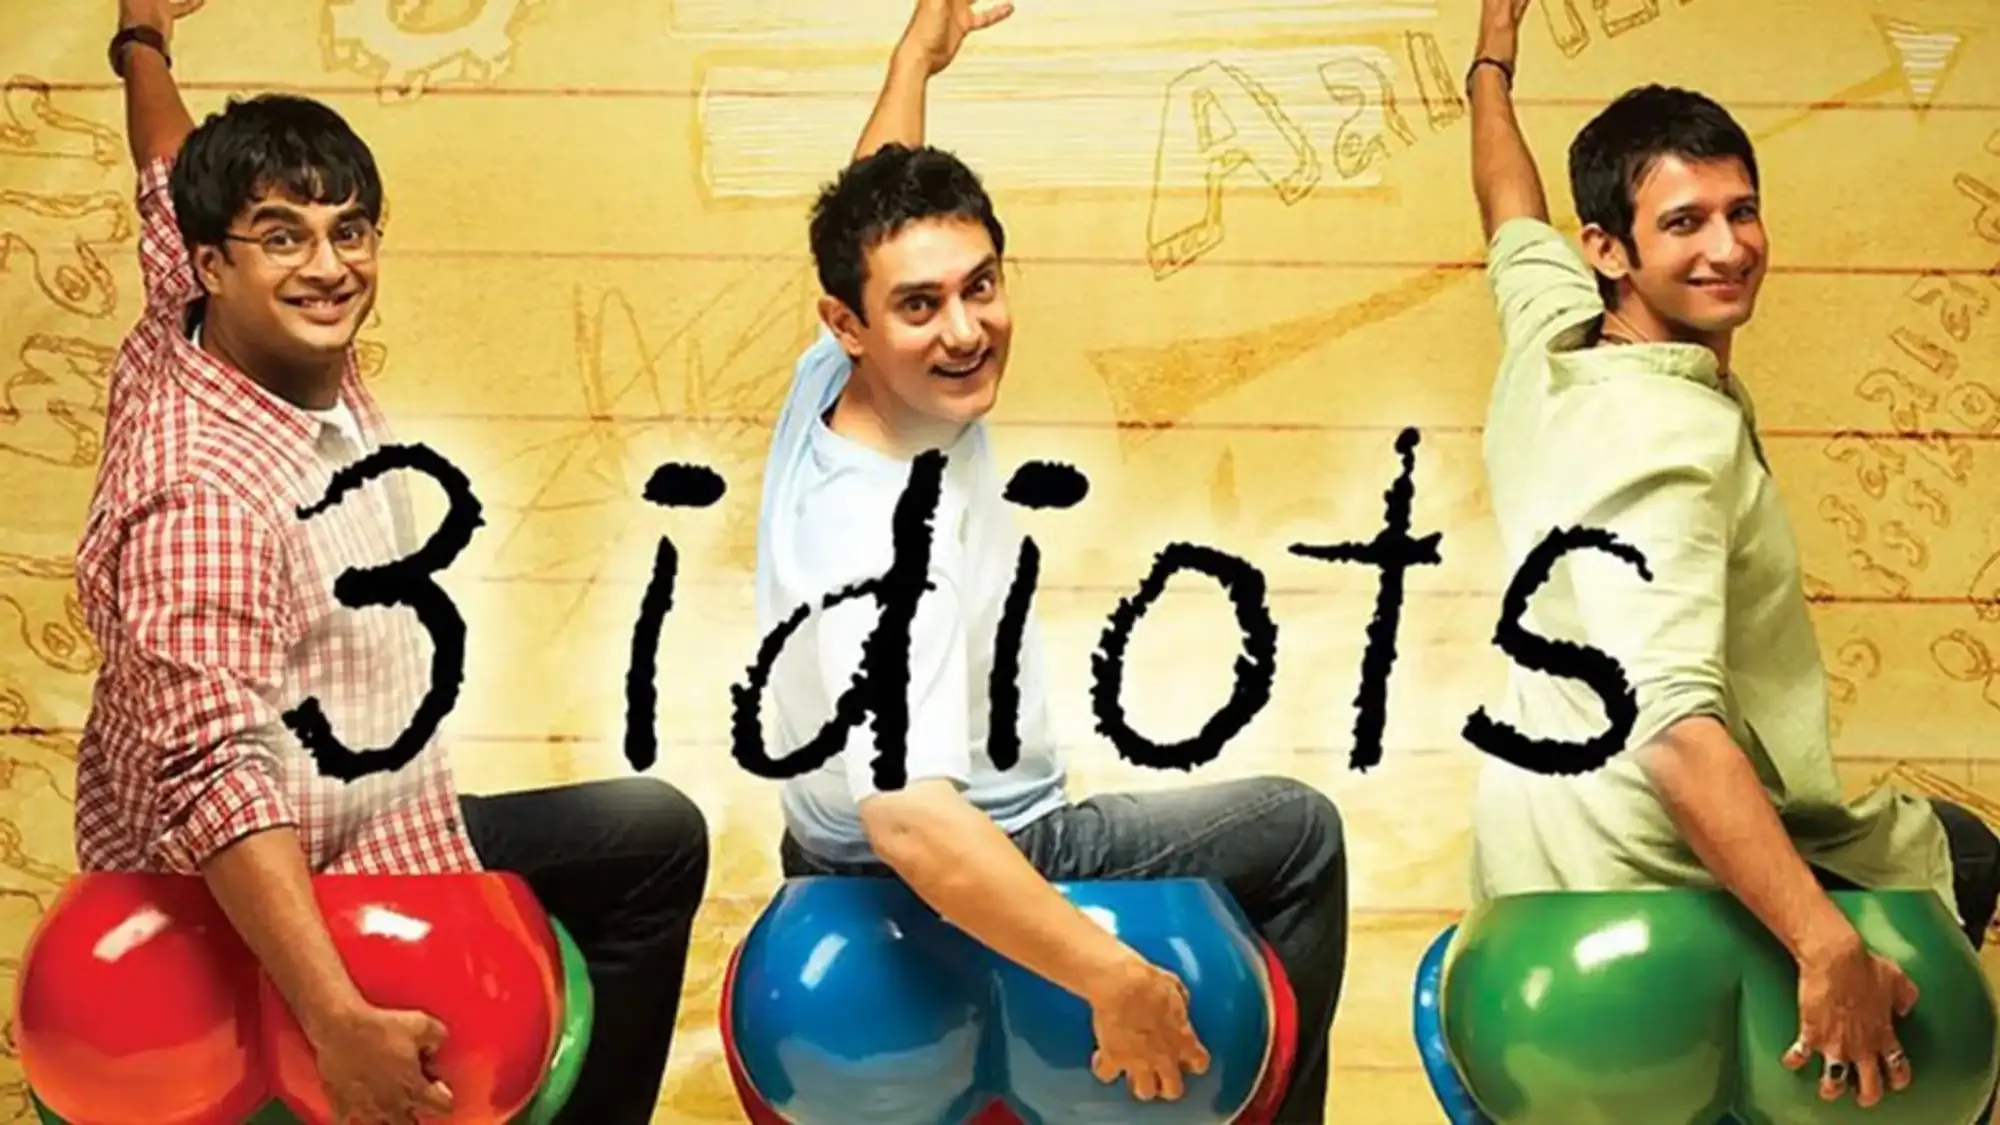 3 Idiots movie review